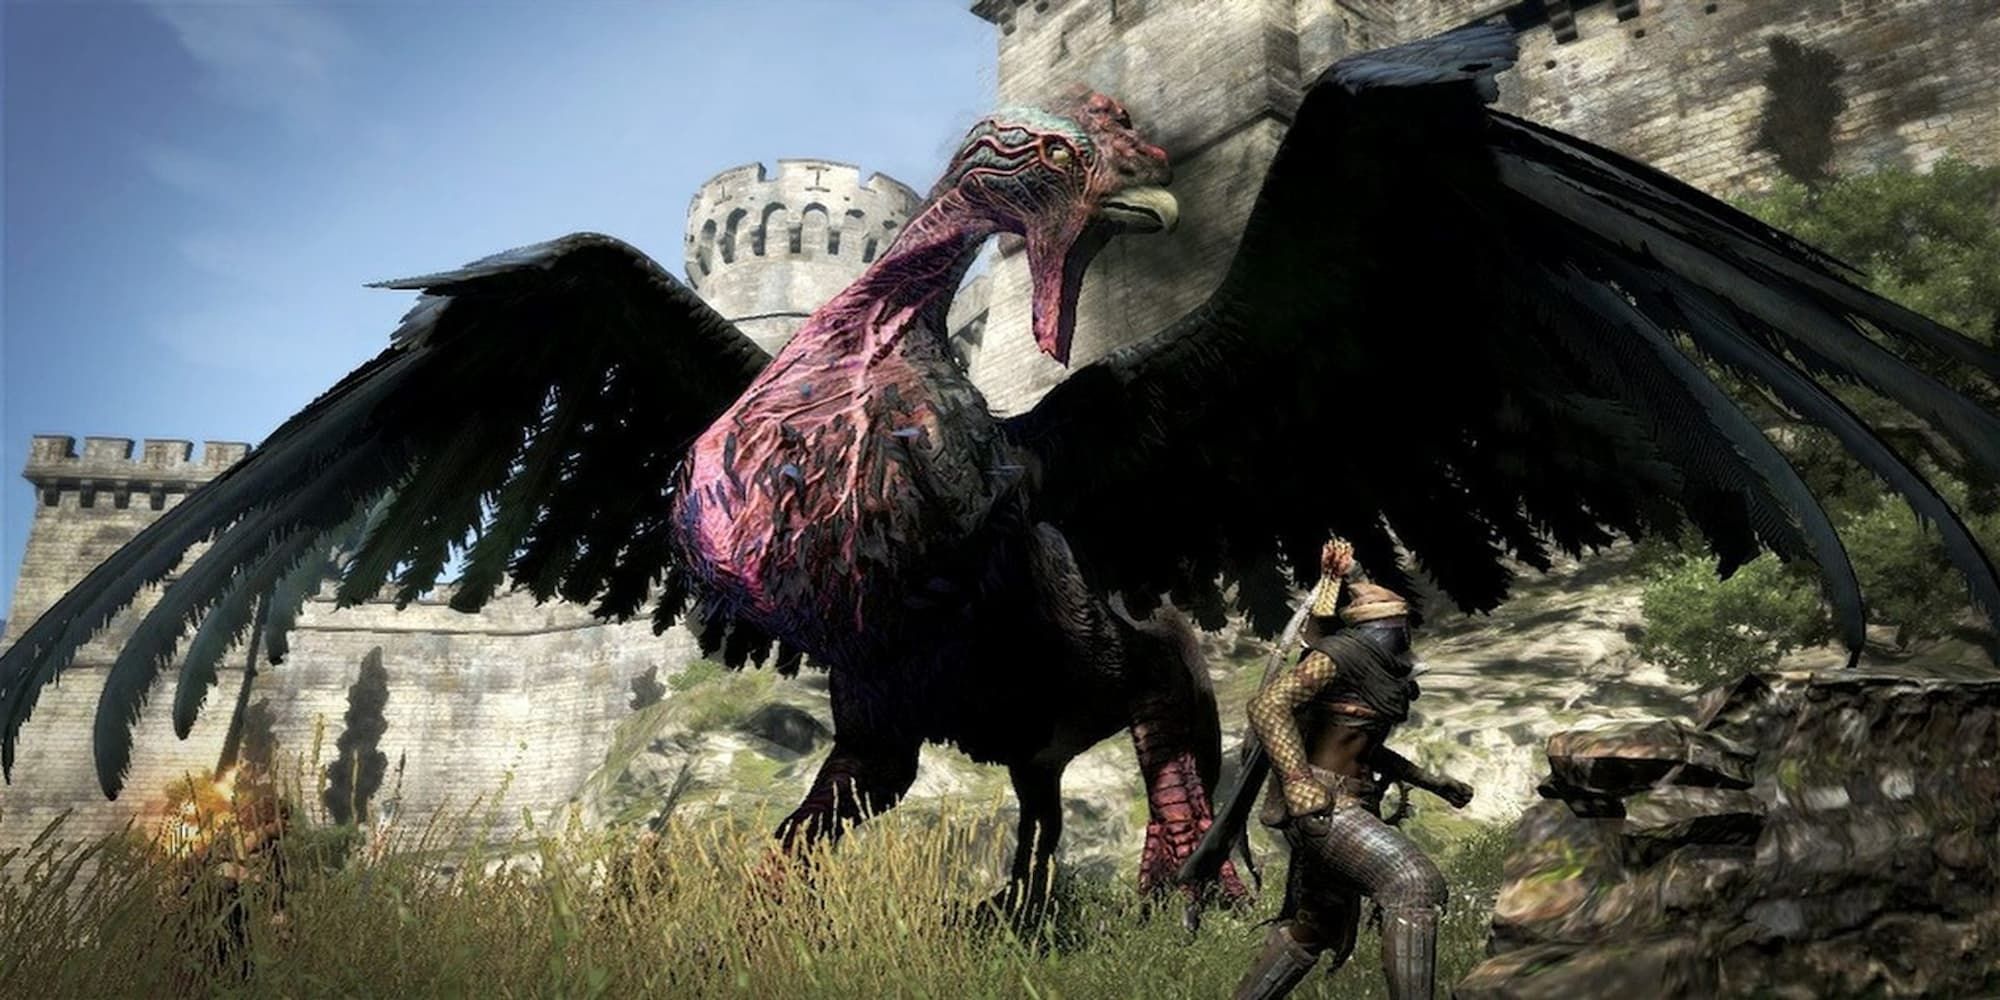 Dragon's Dogma cockatrice black body in front of large castle wings spread out head to side